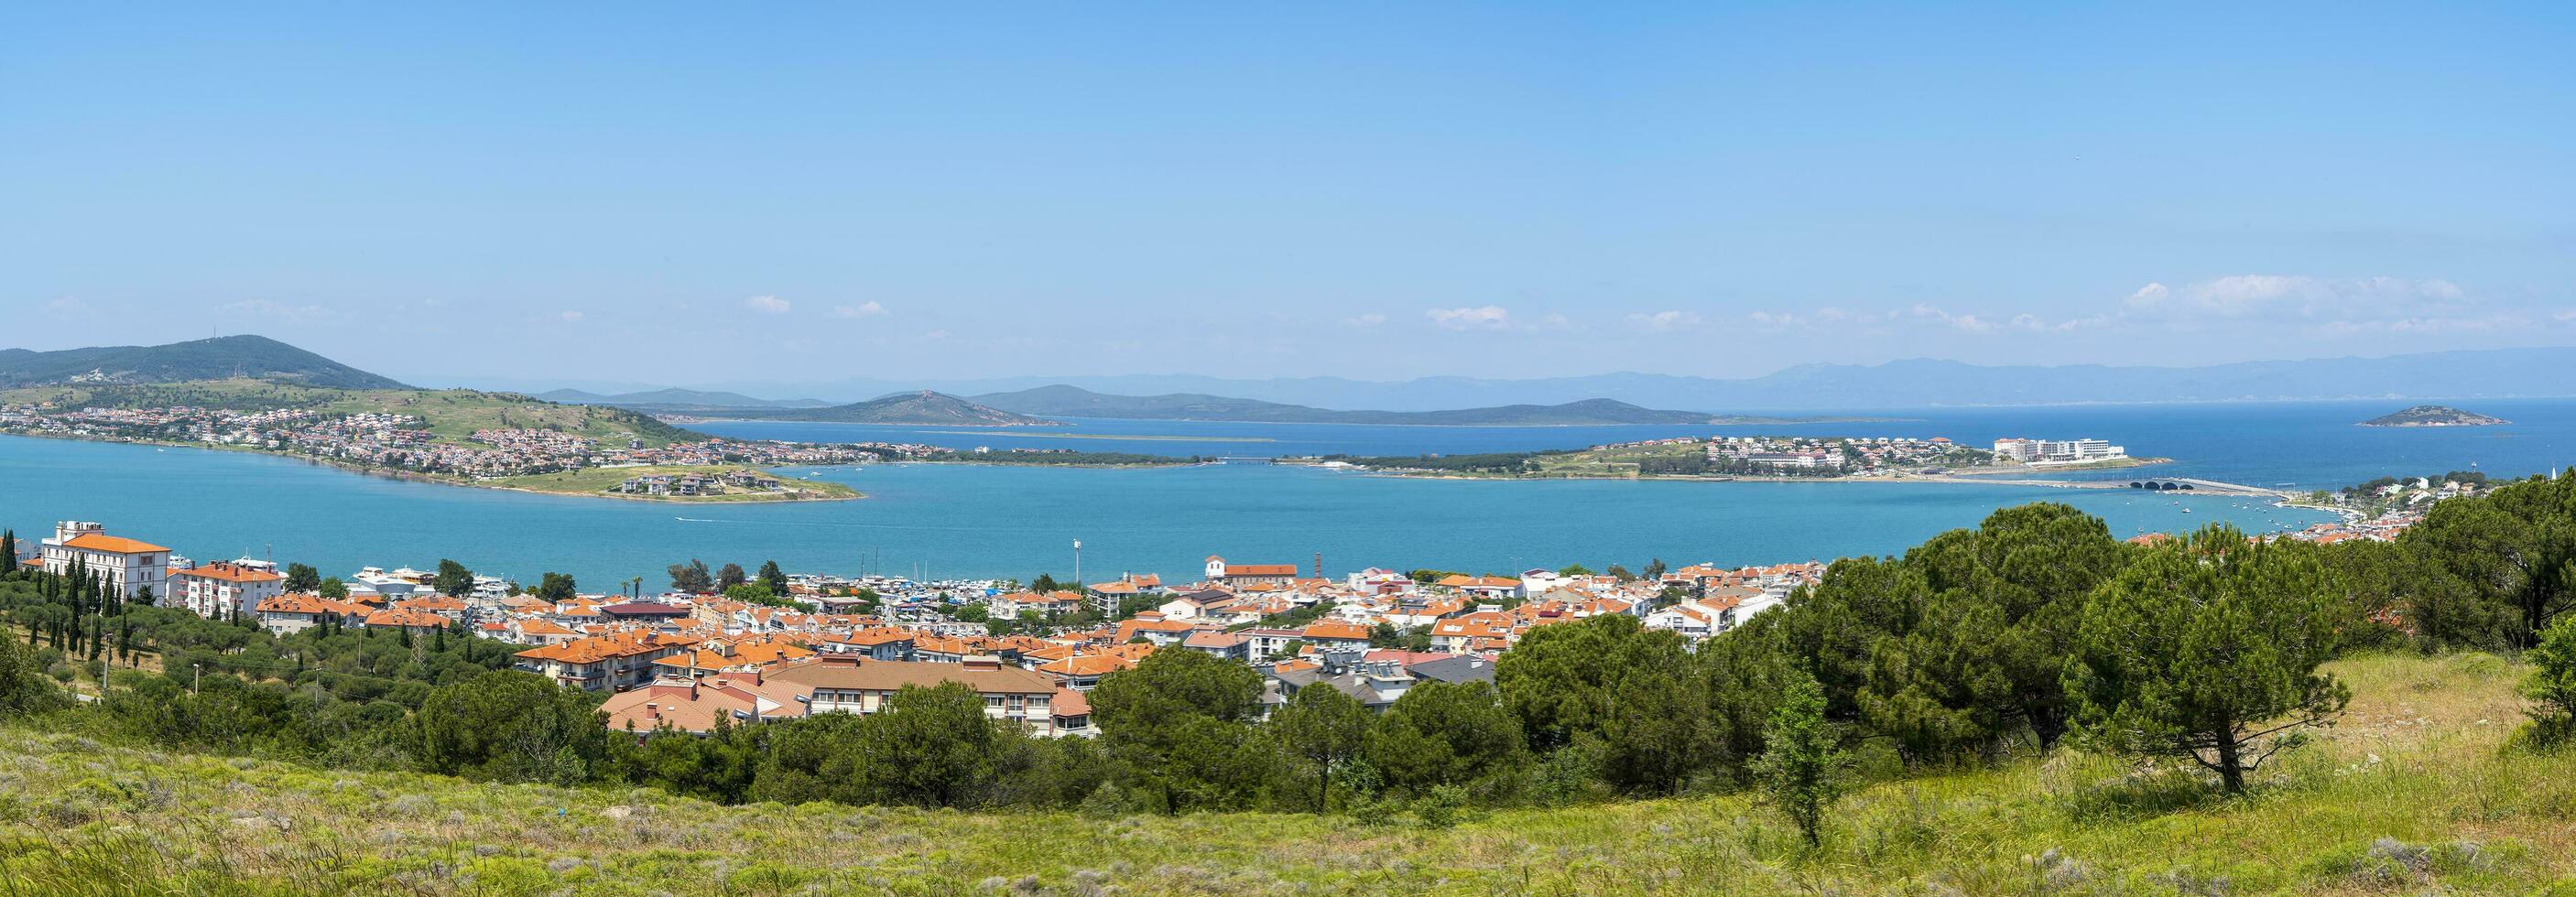 Panorama of the city of Ayvalik in Turkey on a summer and sunny day. photo